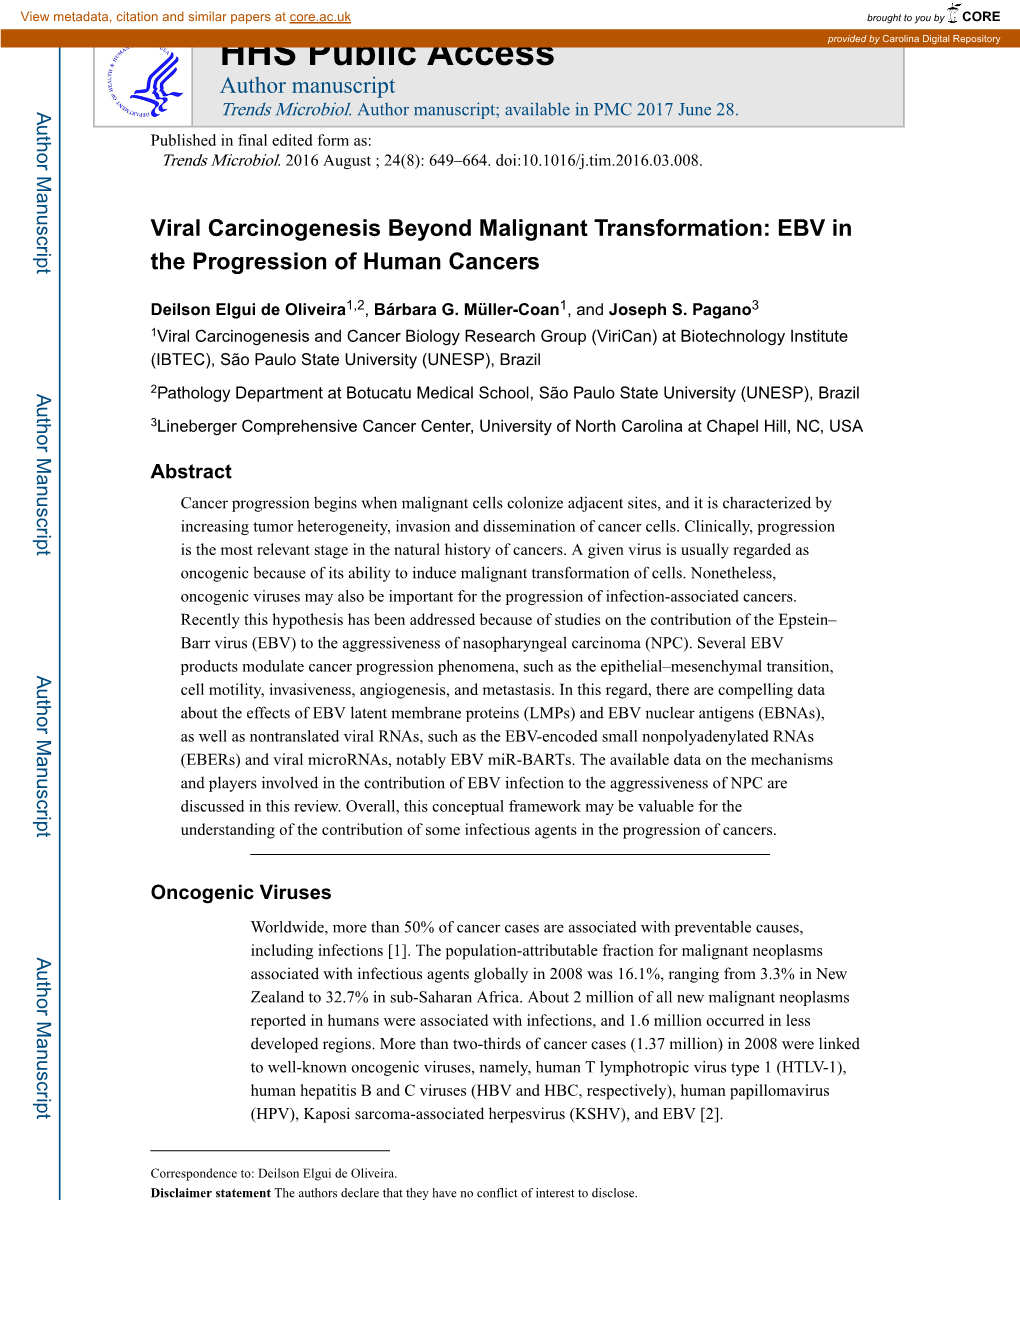 EBV in the Progression of Human Cancers